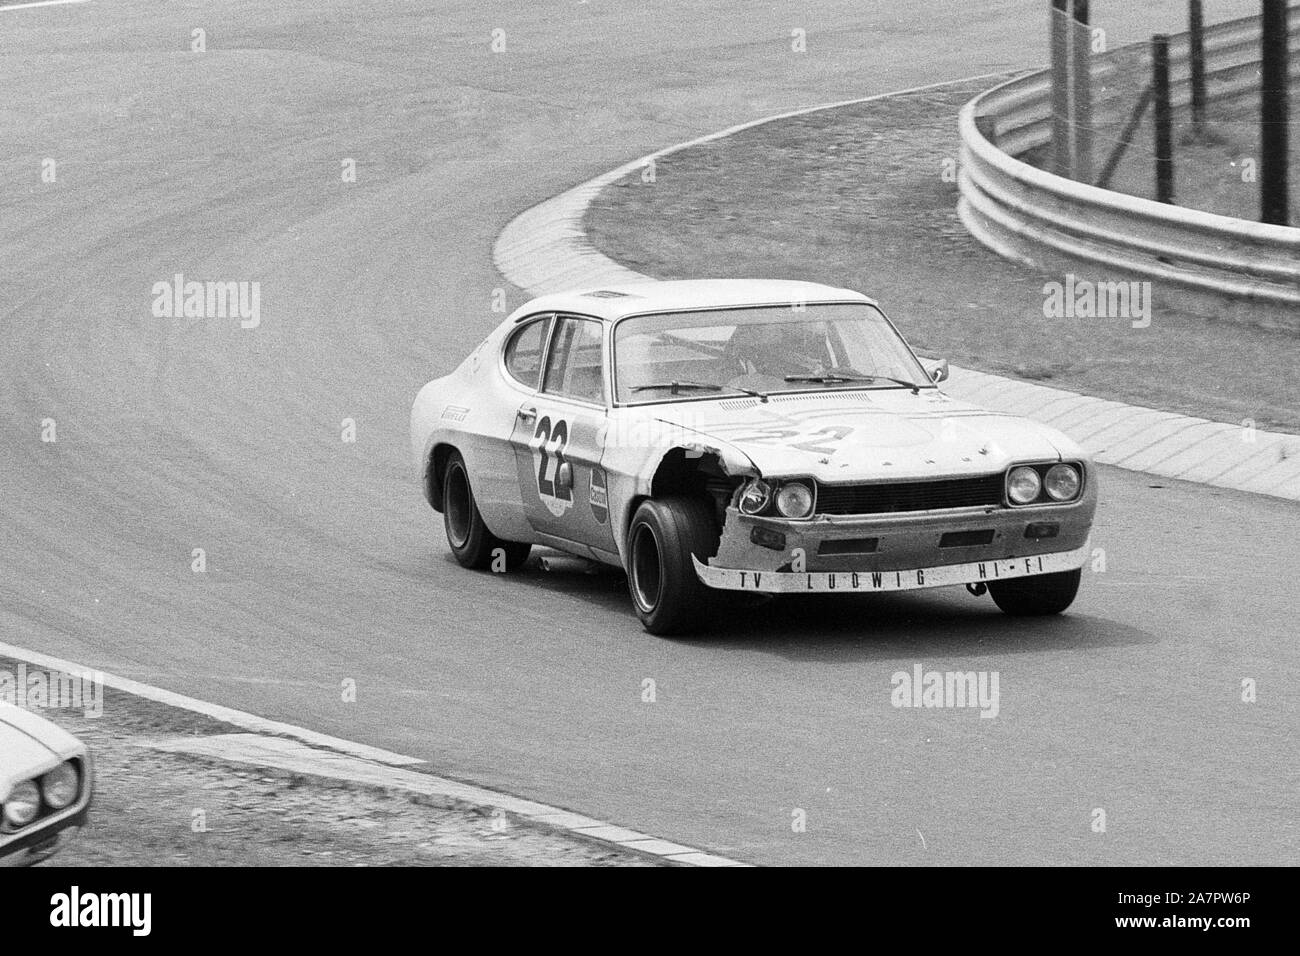 Ford Capri 3.0 during 1970s Touring Car Race at the Nuerburgring, Germany Stock Photo